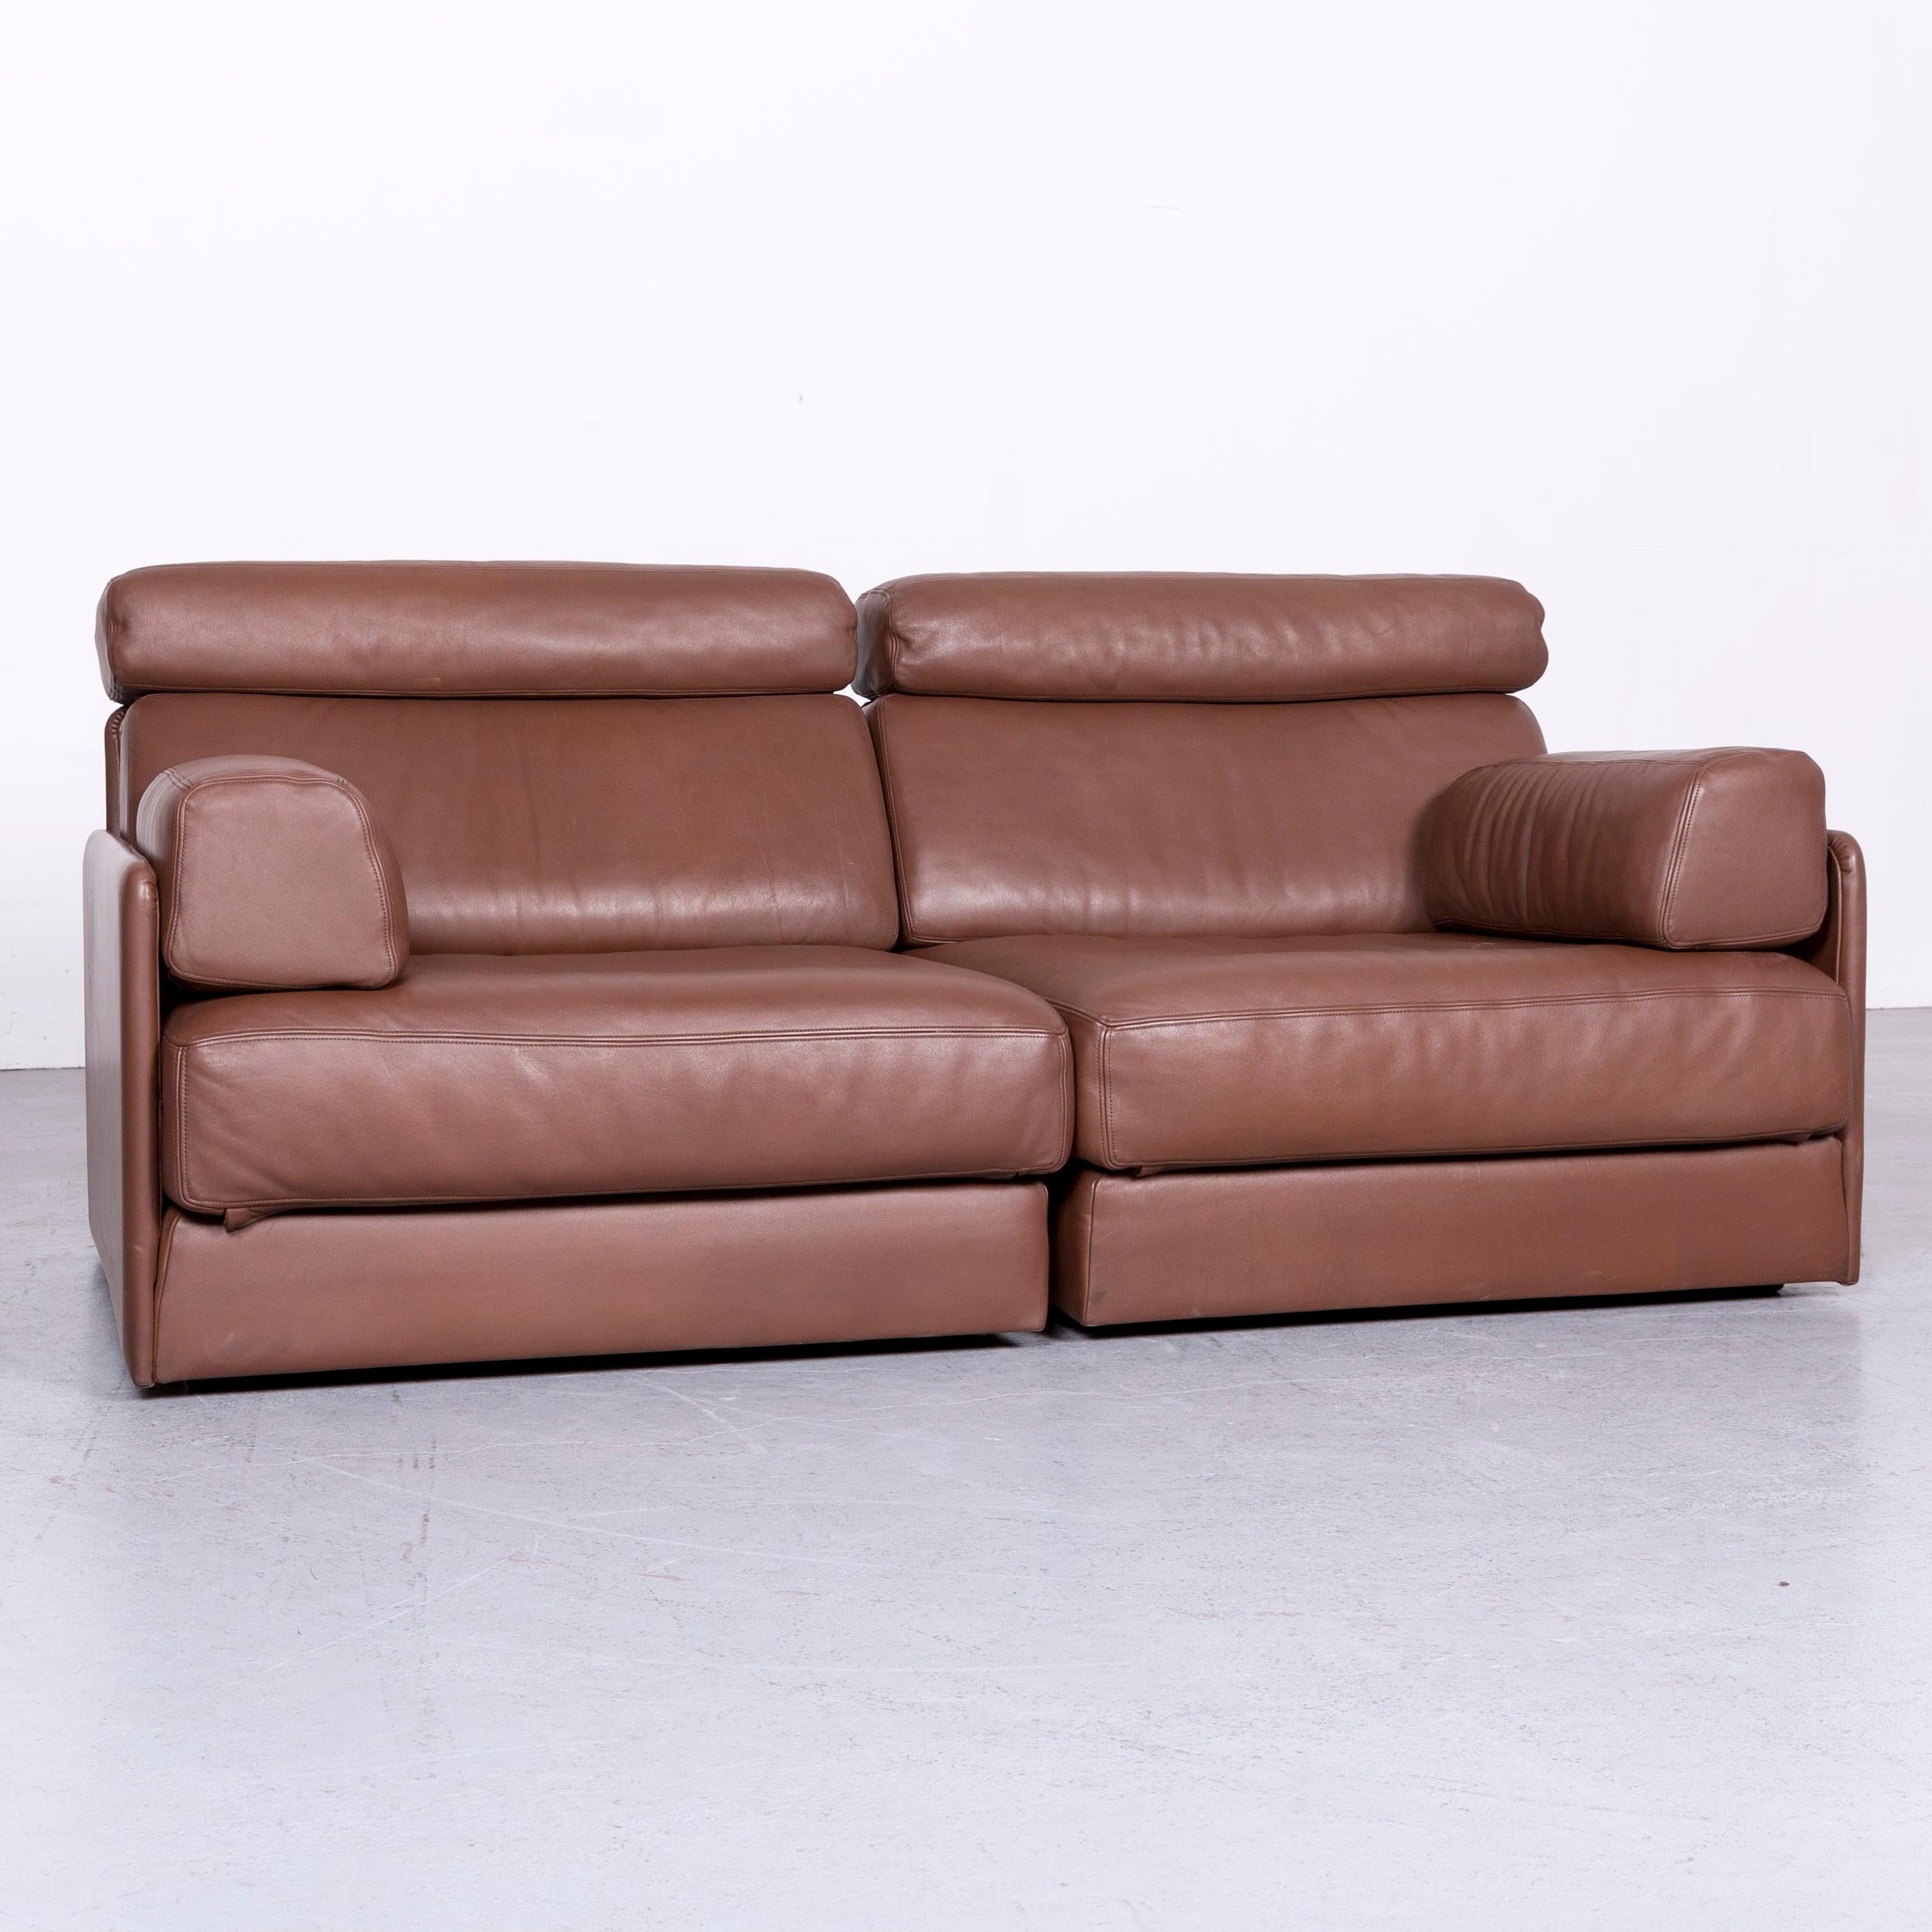 We bring to you a De Sede Ds 77 Designer Leather Sofa Brown Two-Seat Couch





